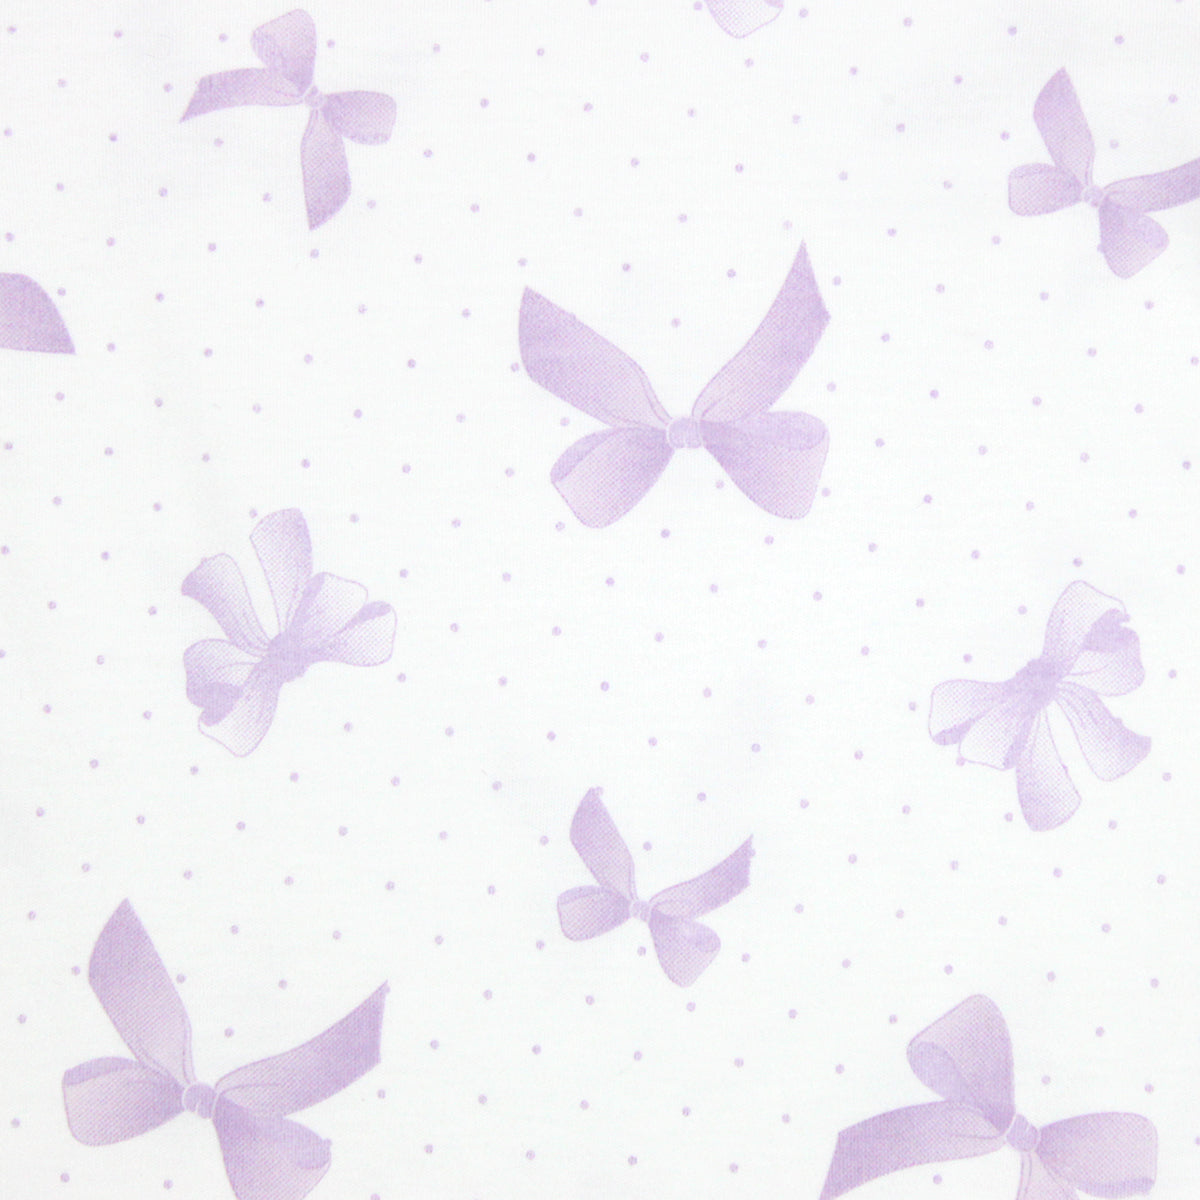 Lila Bows Printed Footie | Baby Girl